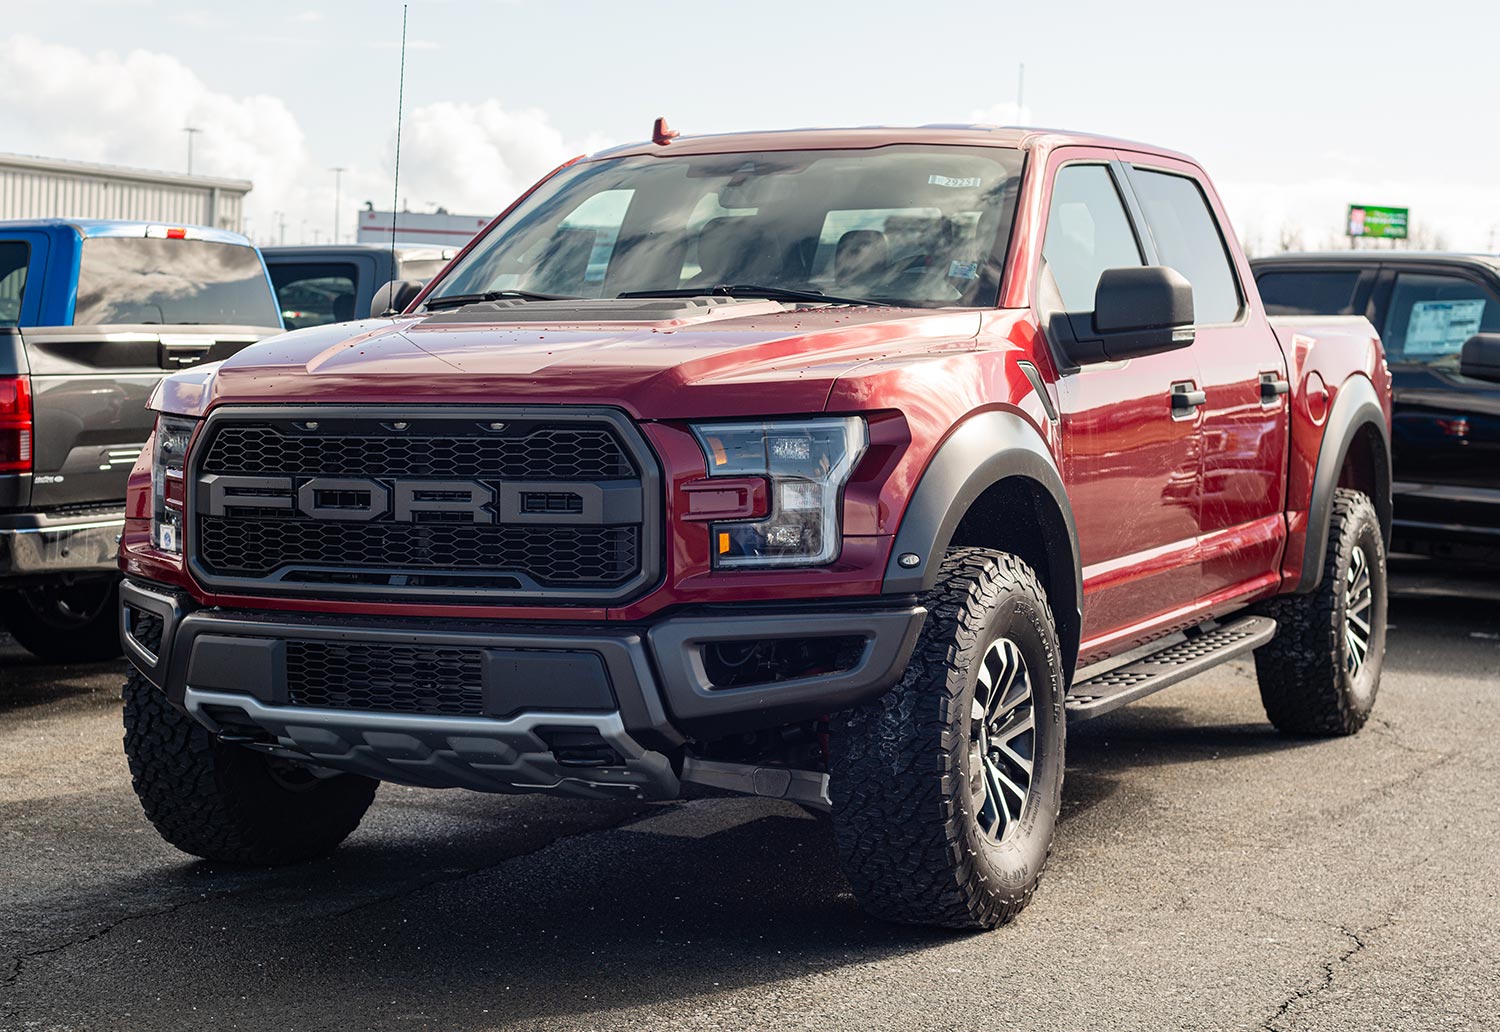 Ford F-150 Raptor pickup truck at a Ford dealership